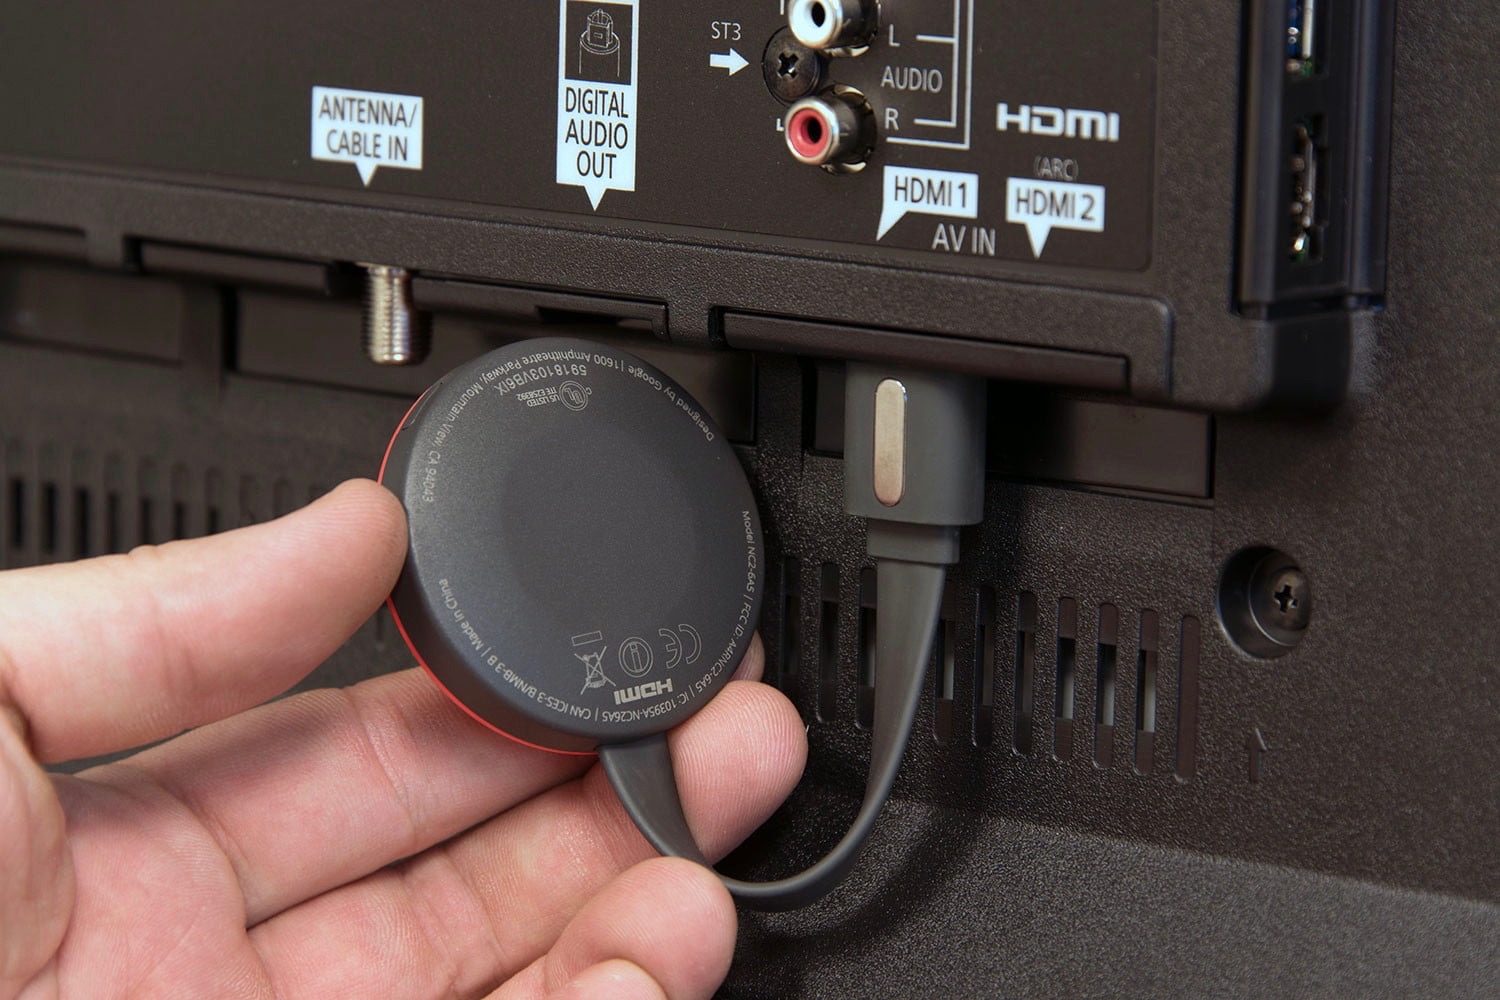 Is this a counterfeit device? The 4K label looks cheap to me. : r/Chromecast